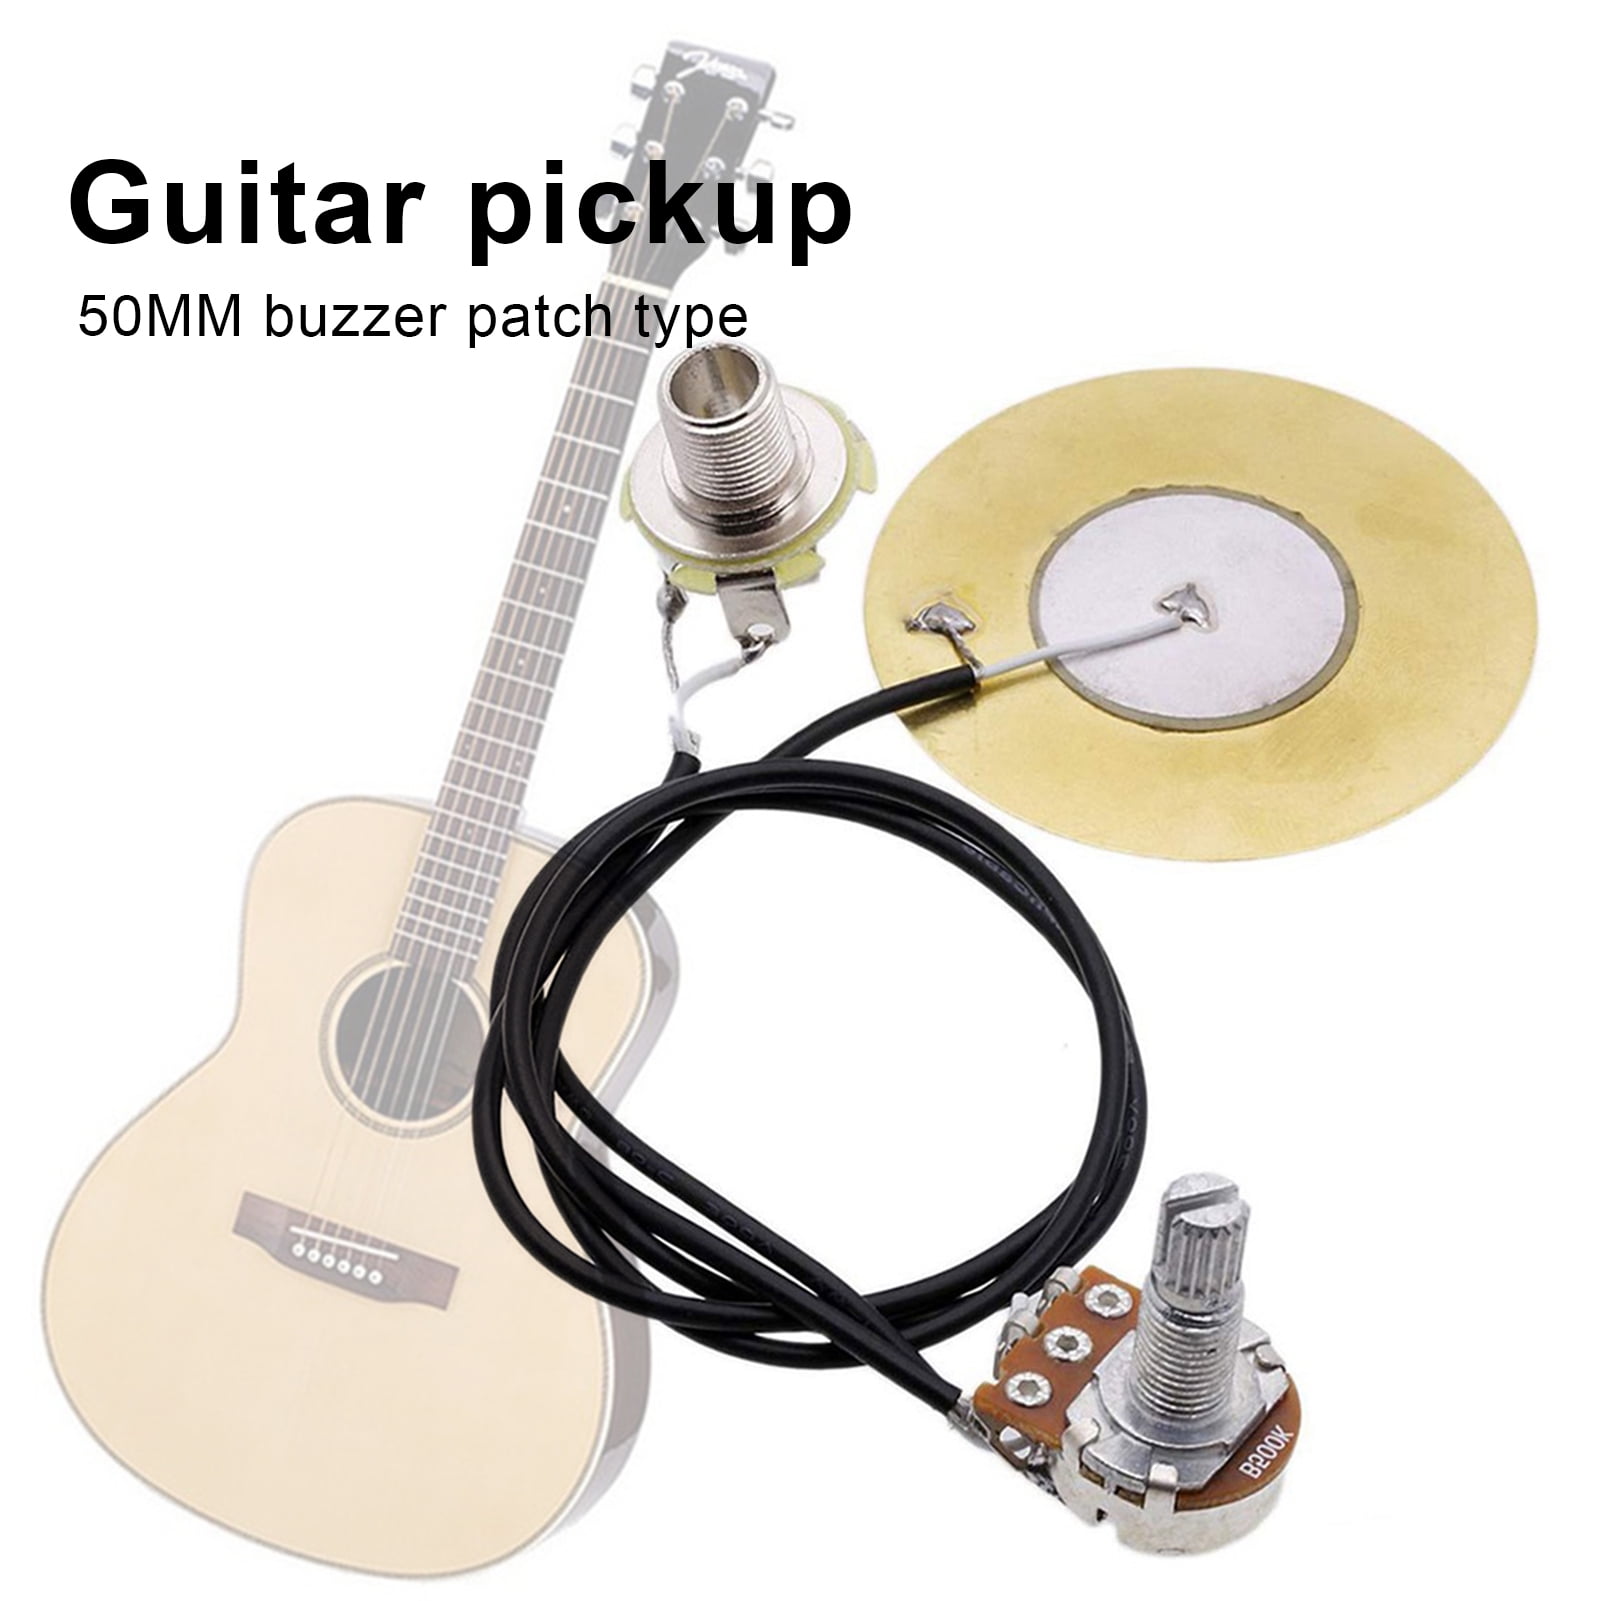 Self-Adhesive Pickups Piezo Transducer Contact Microphone Transducer Pickups with End Pin for Electronic Acoustic Guitar T-11 